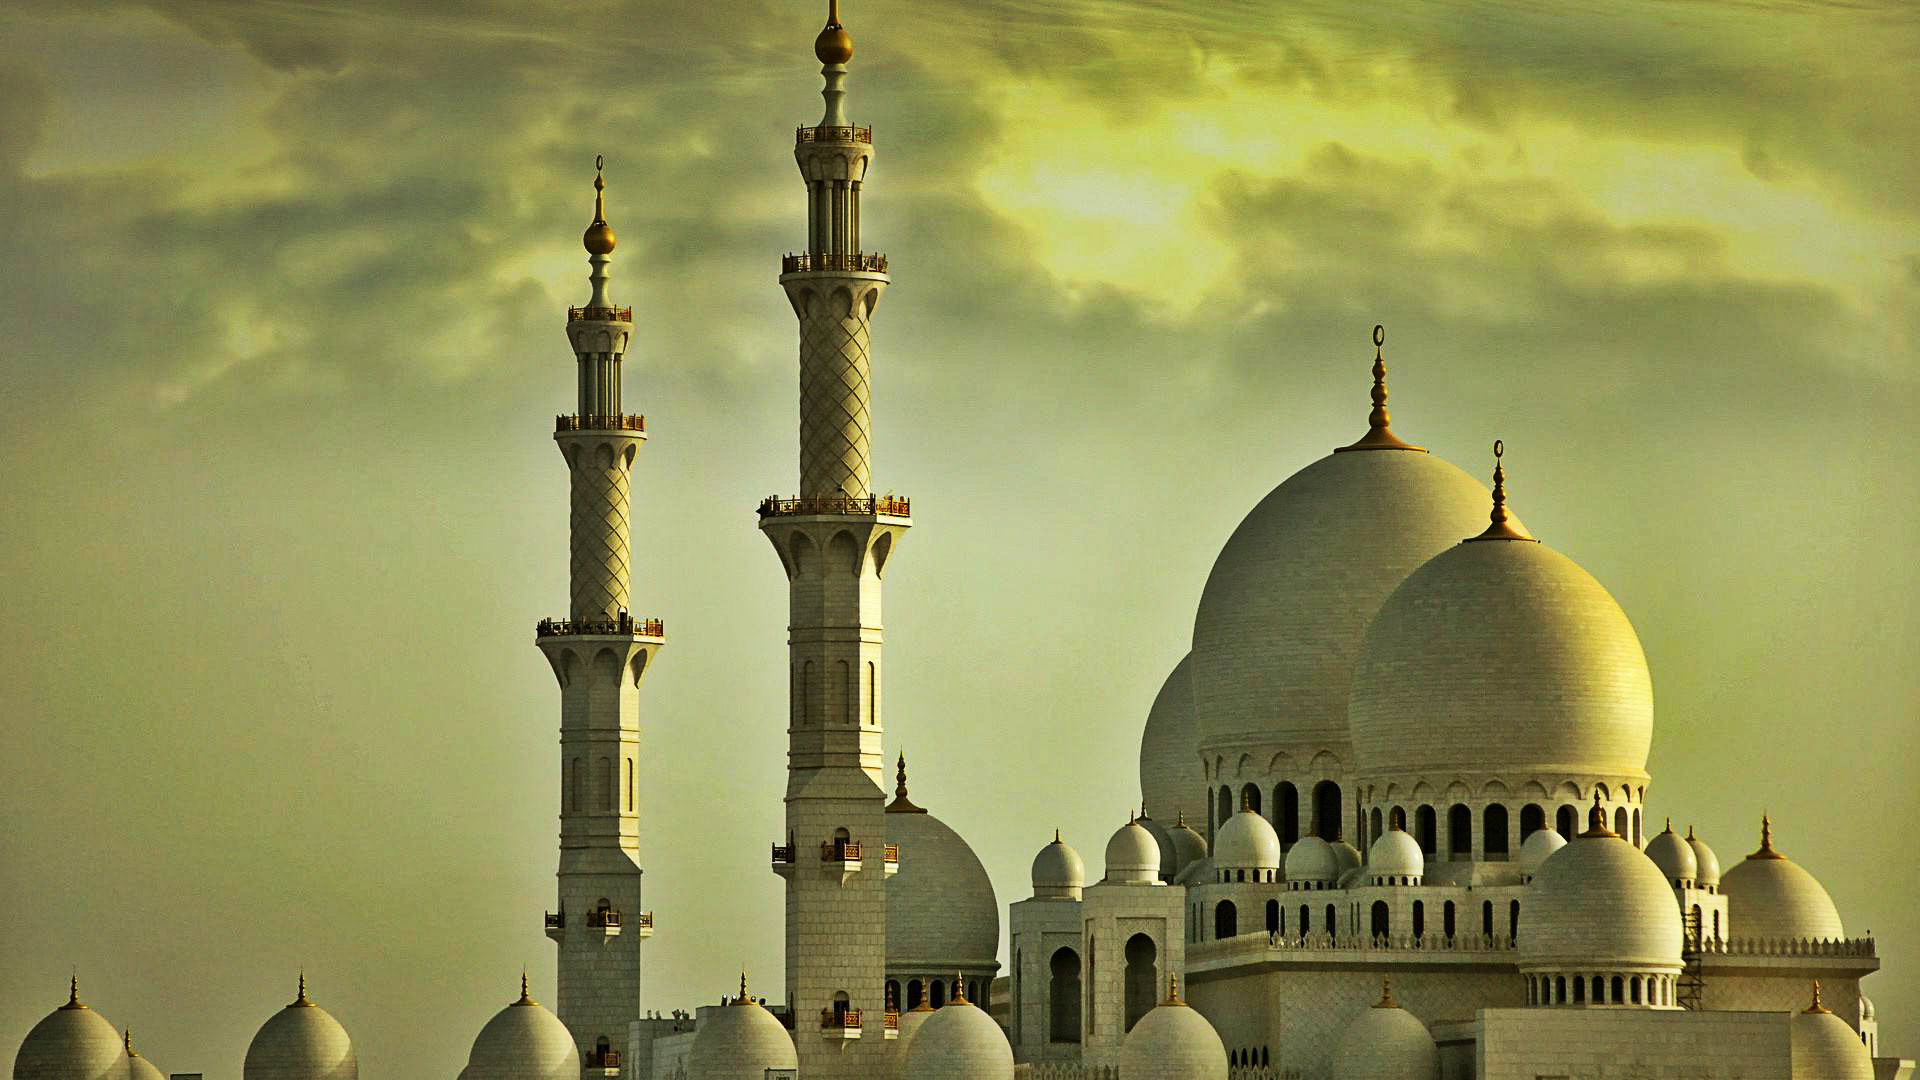 beautiful mosque wallpapers,landmark,mosque,khanqah,holy places,place of worship